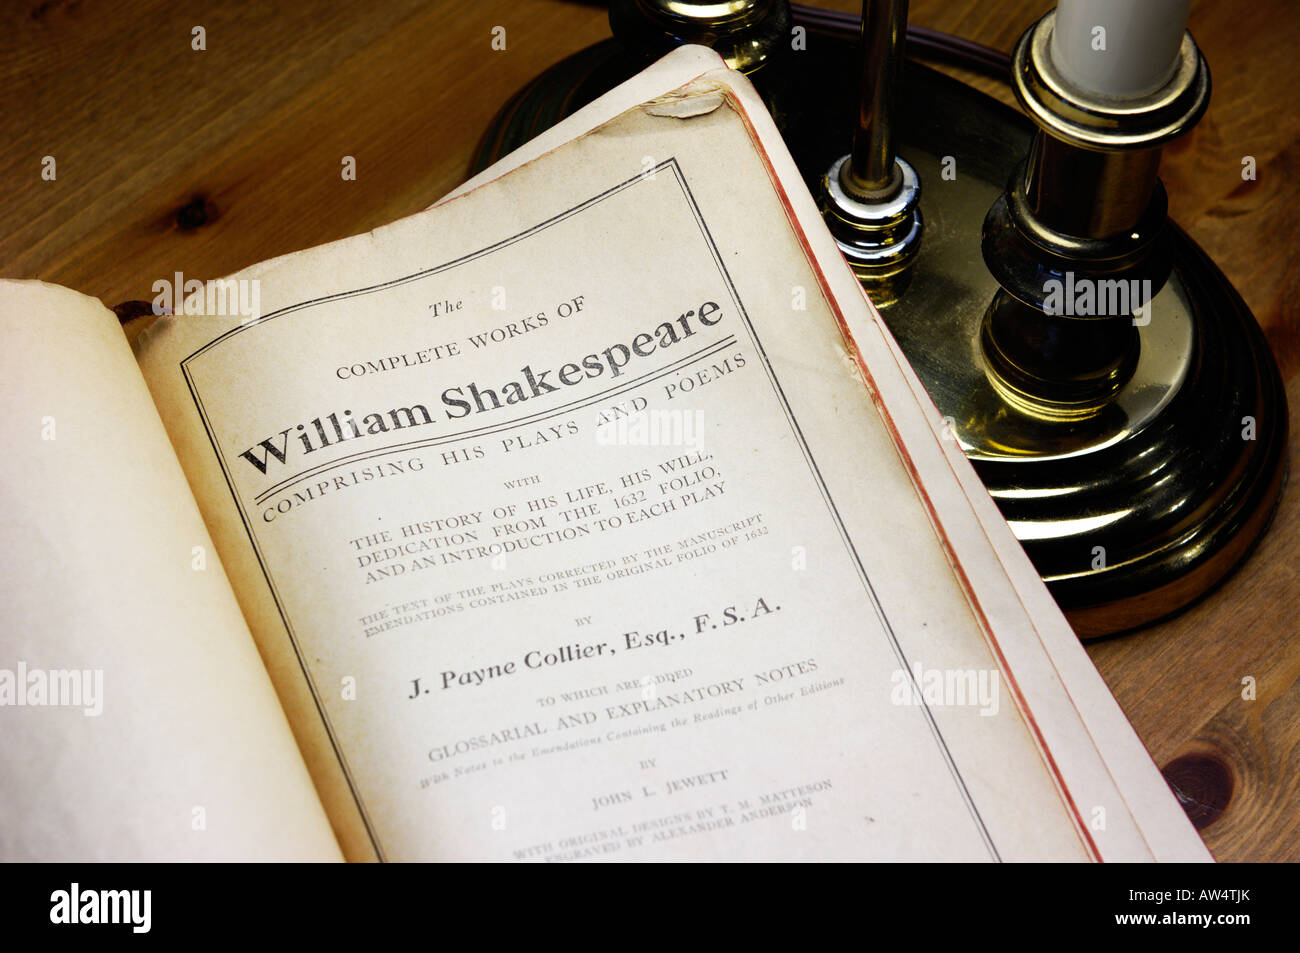 Complete works of William Shakespeare open book Stock Photo